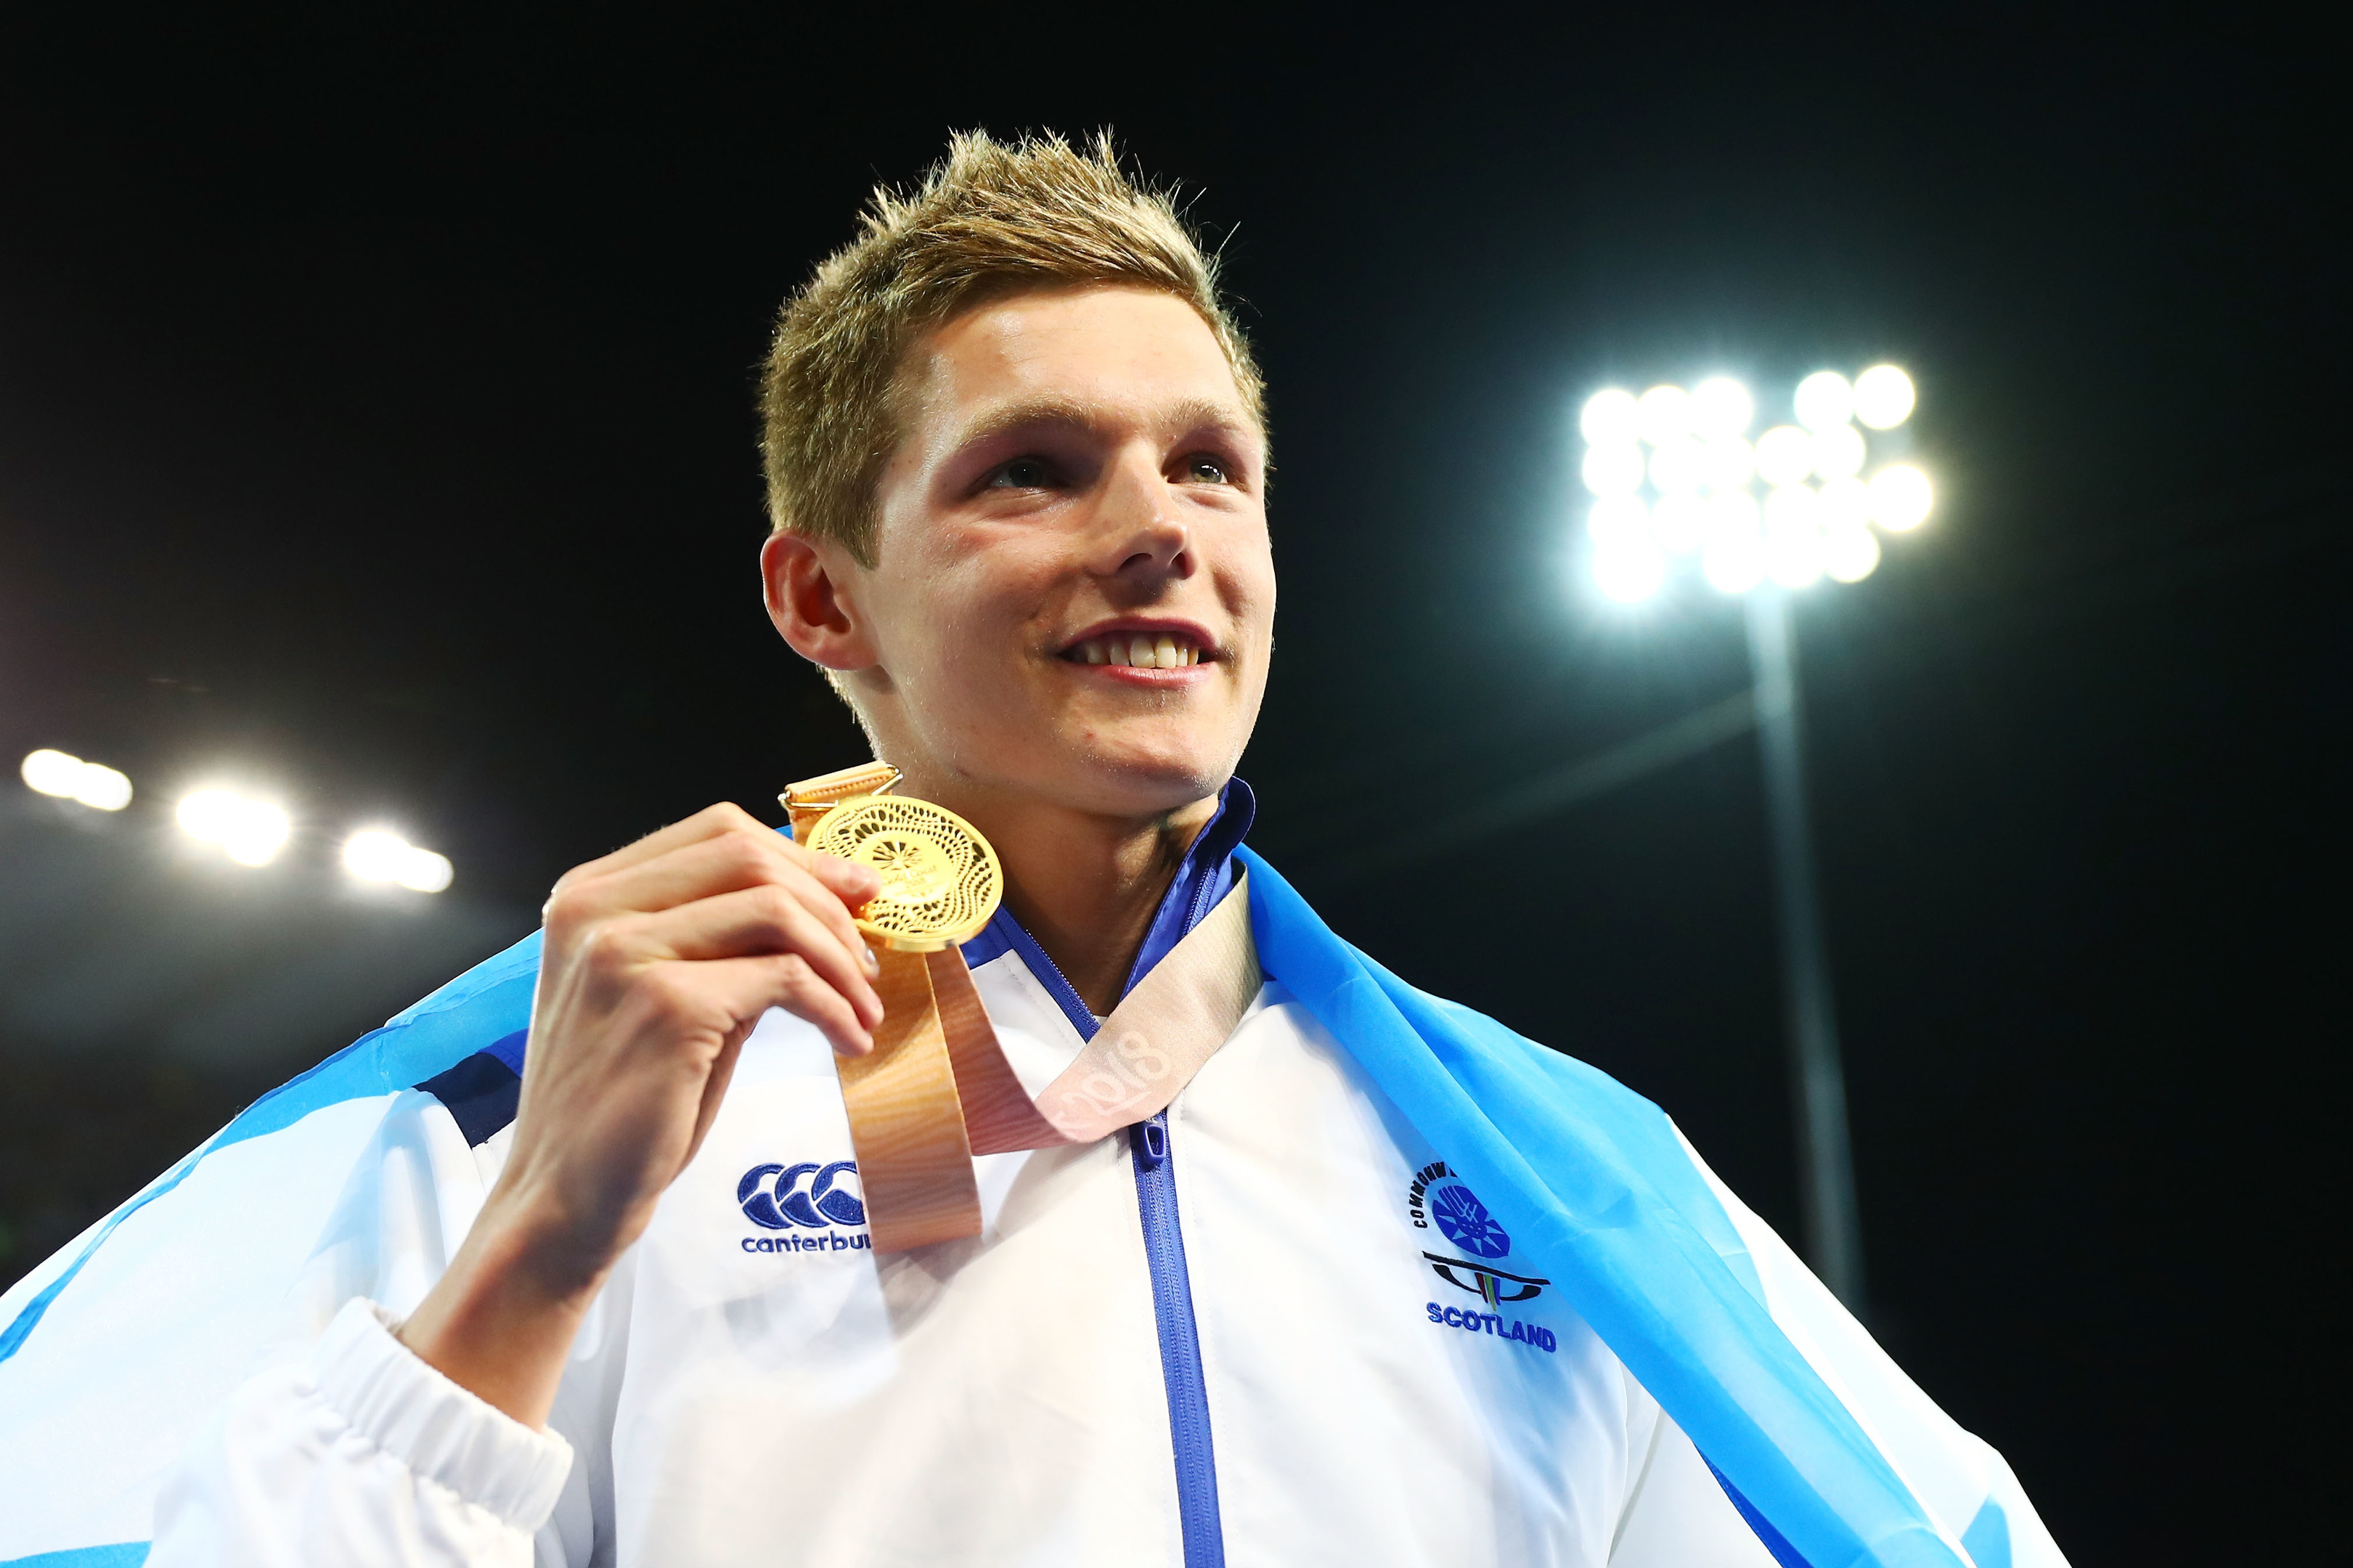 Duncan Scott of Scotland poses during the medal ceremony for the Men's 100m Freestyle Final